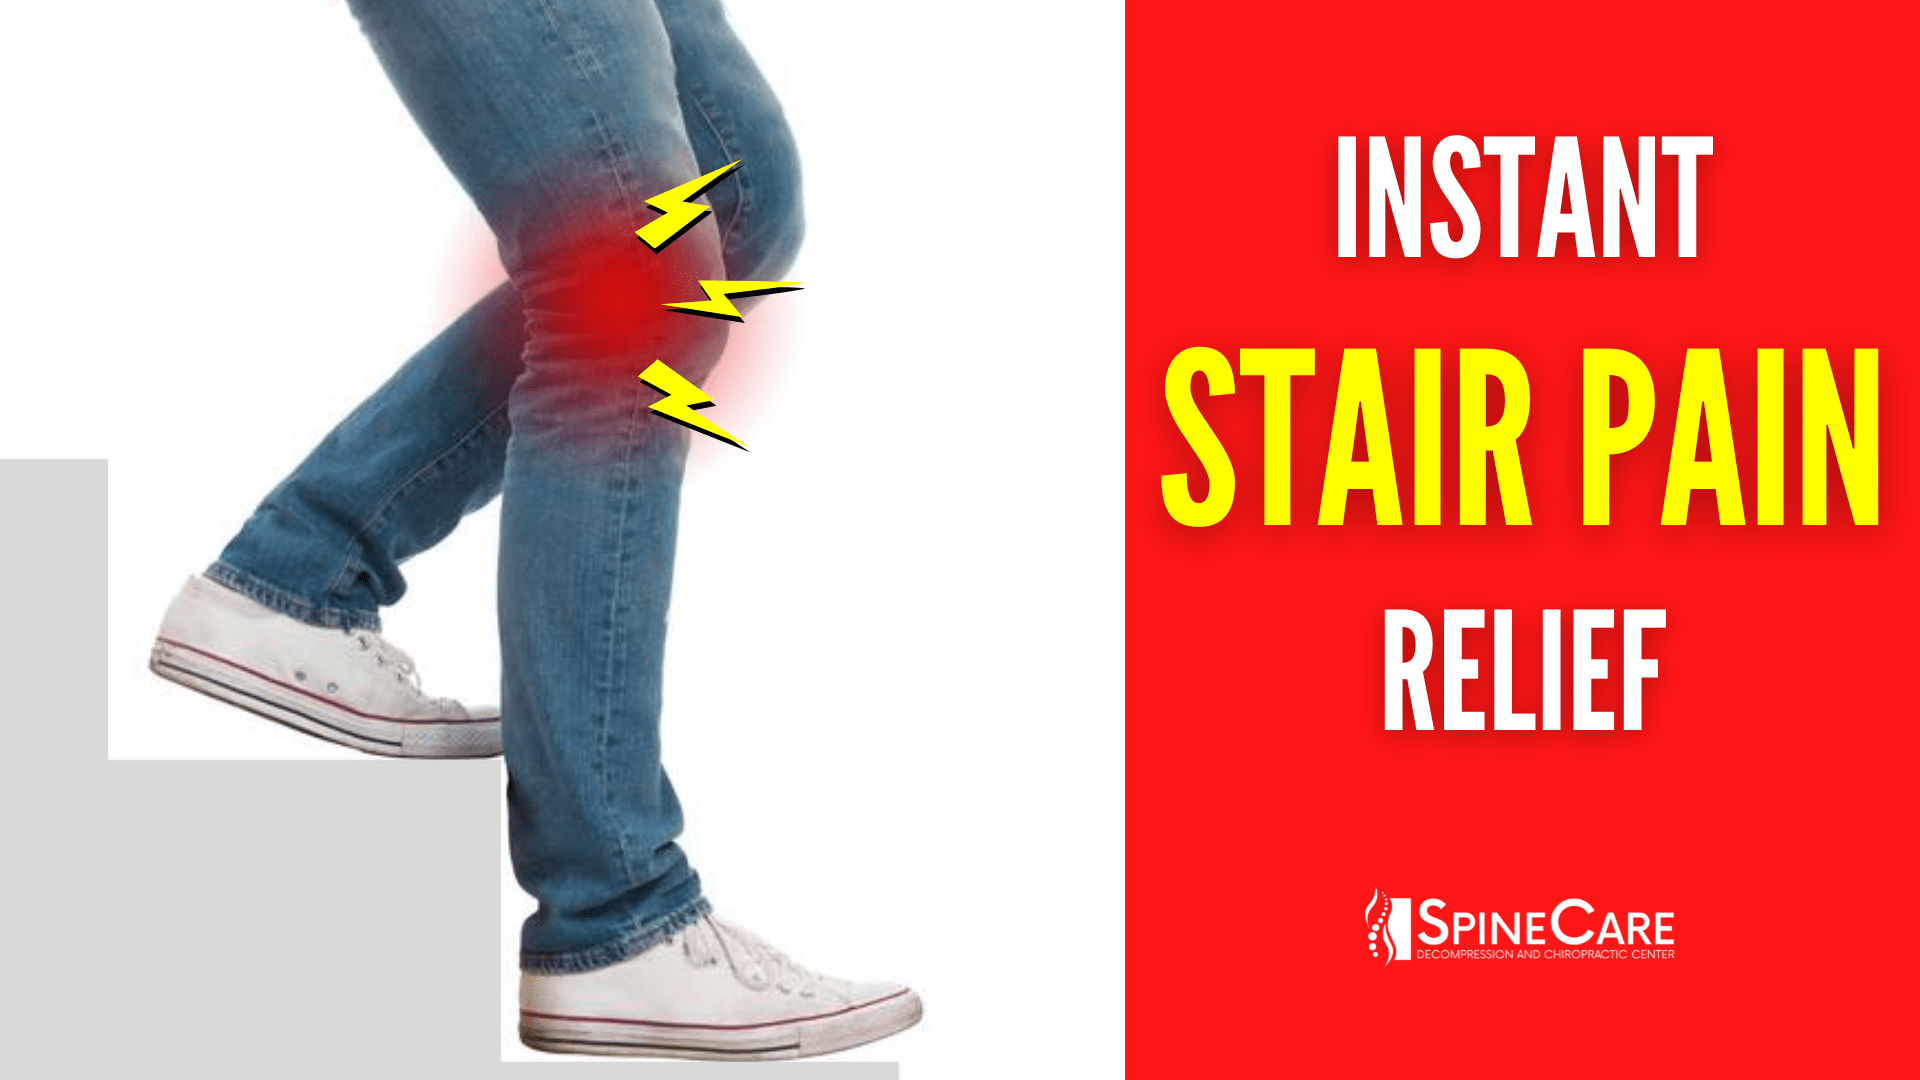 How to Instantly Fix Knee Pain Going Down Stairs | SpineCare | St. Joseph, Michigan Chiropractor